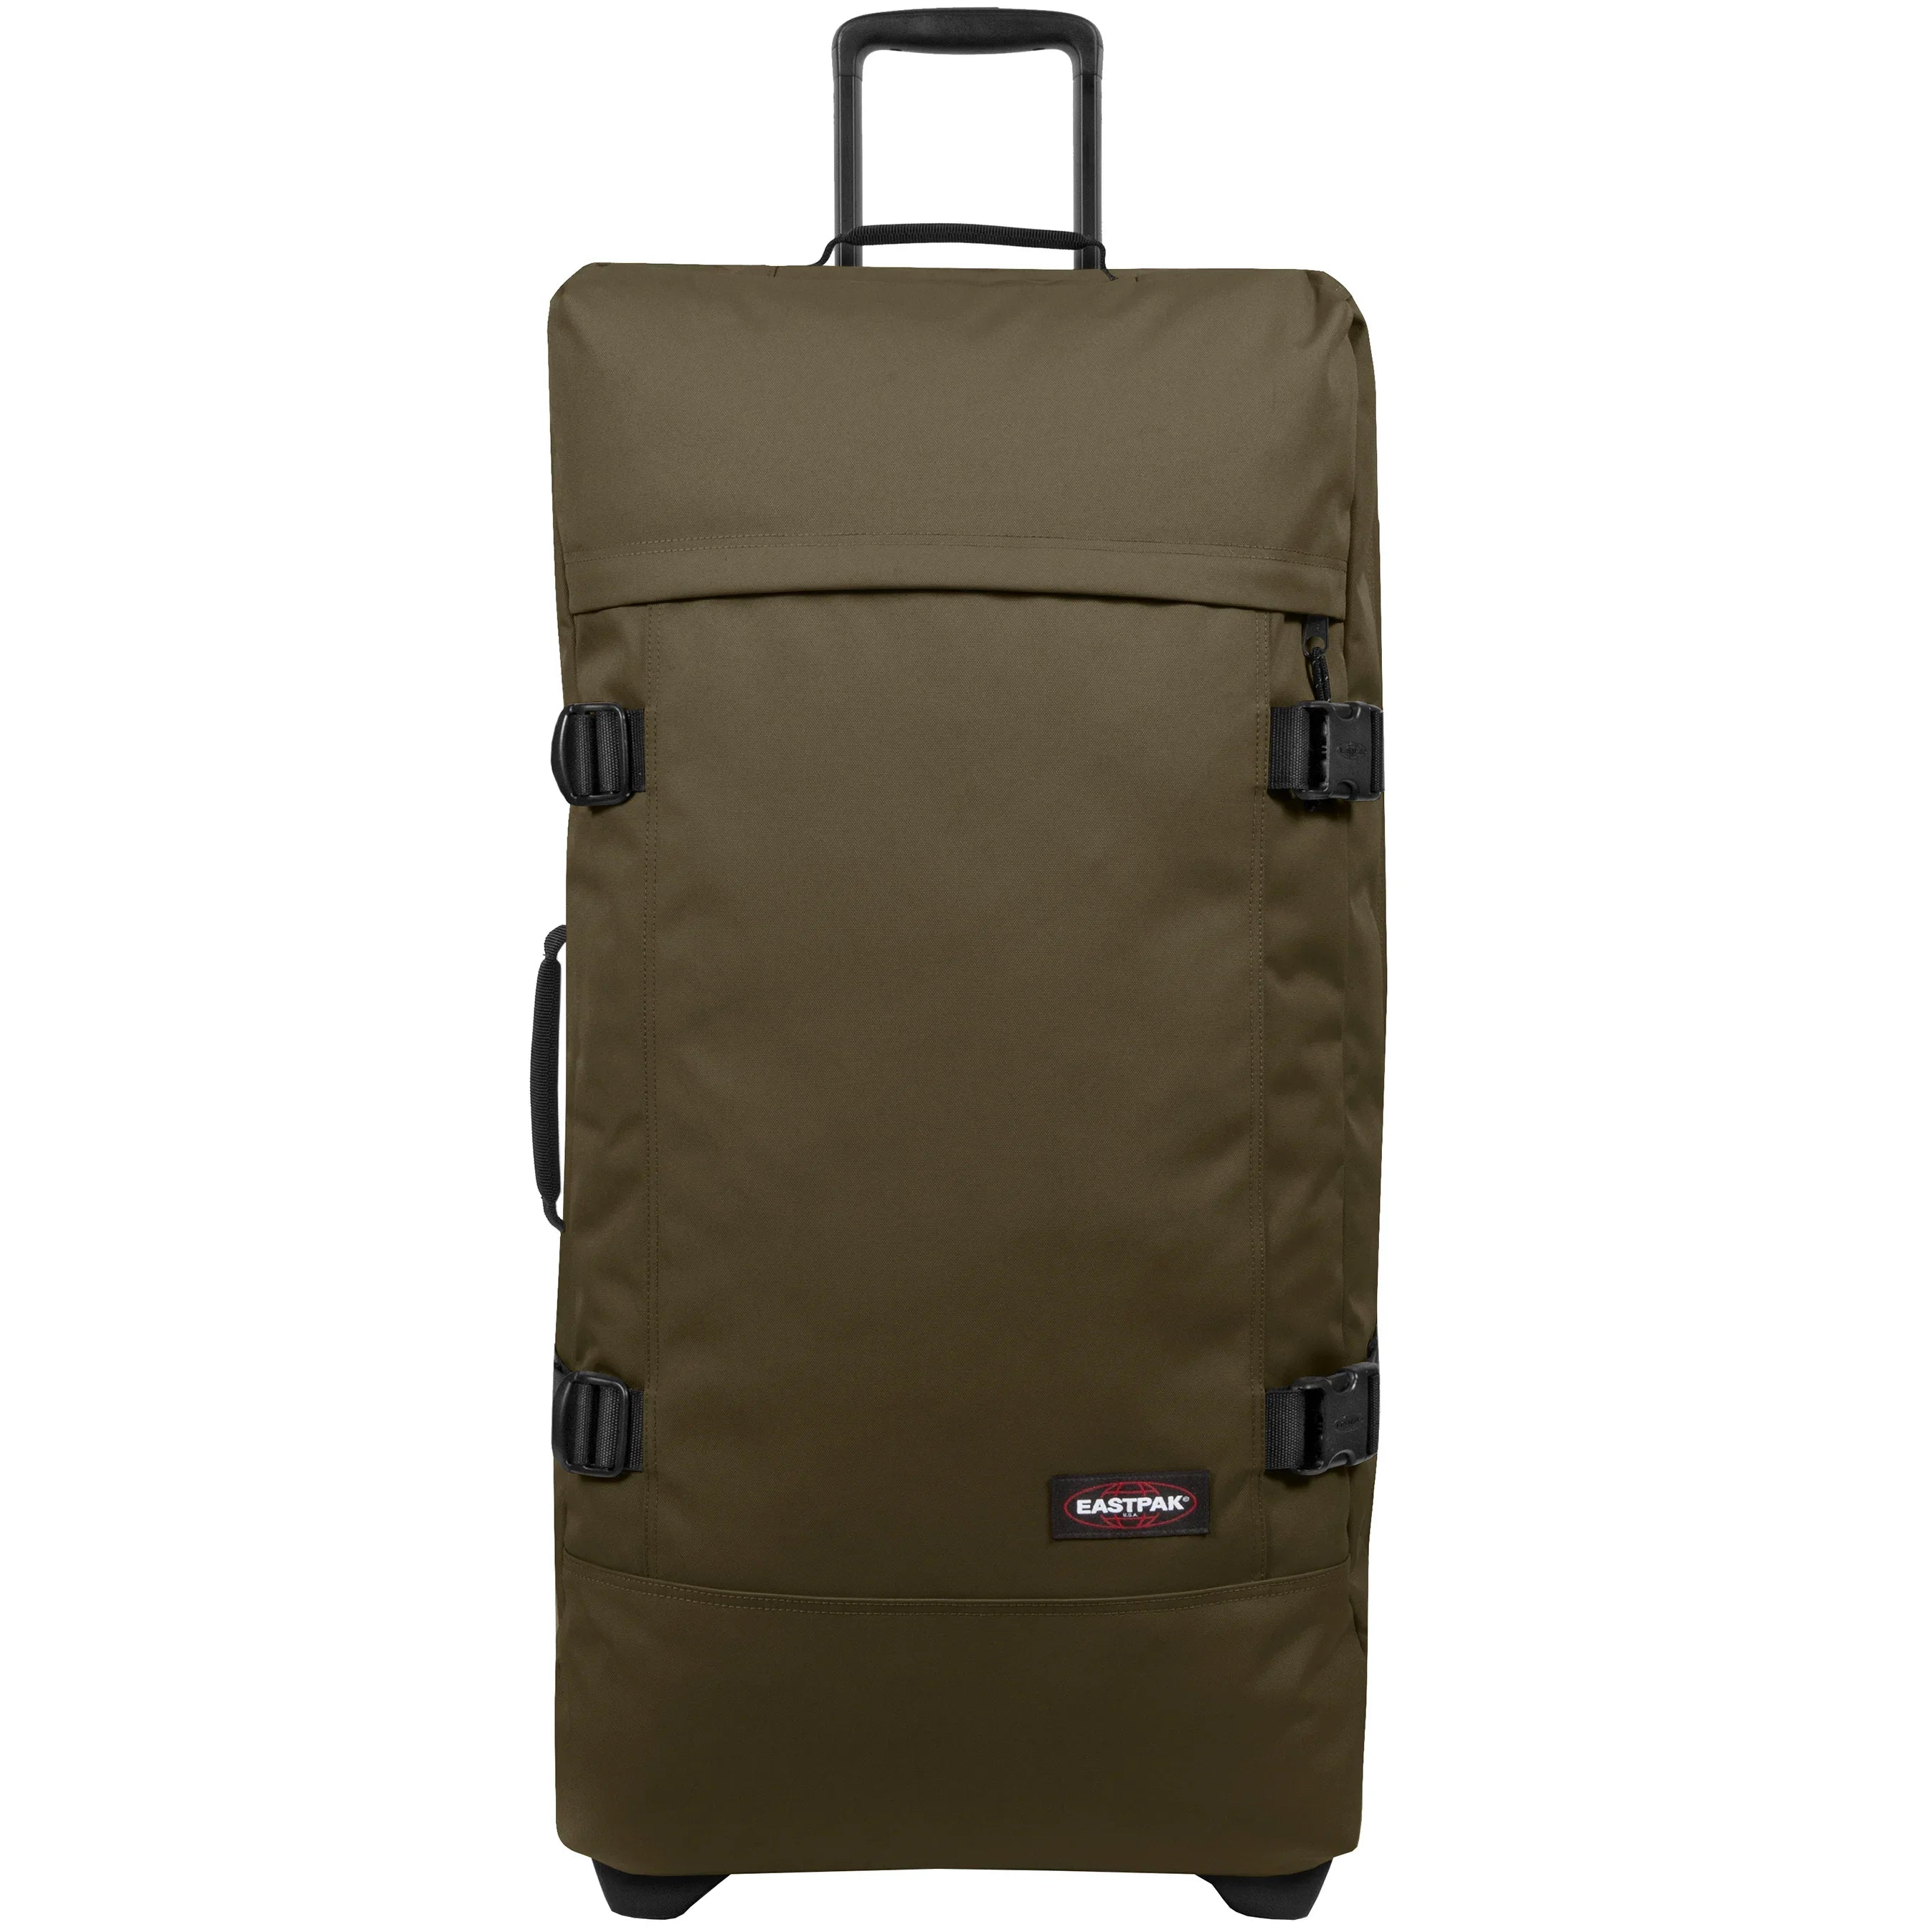 Eastpak Authentic Travel Tranverz 2-wheel trolley 79 cm - Army Olive